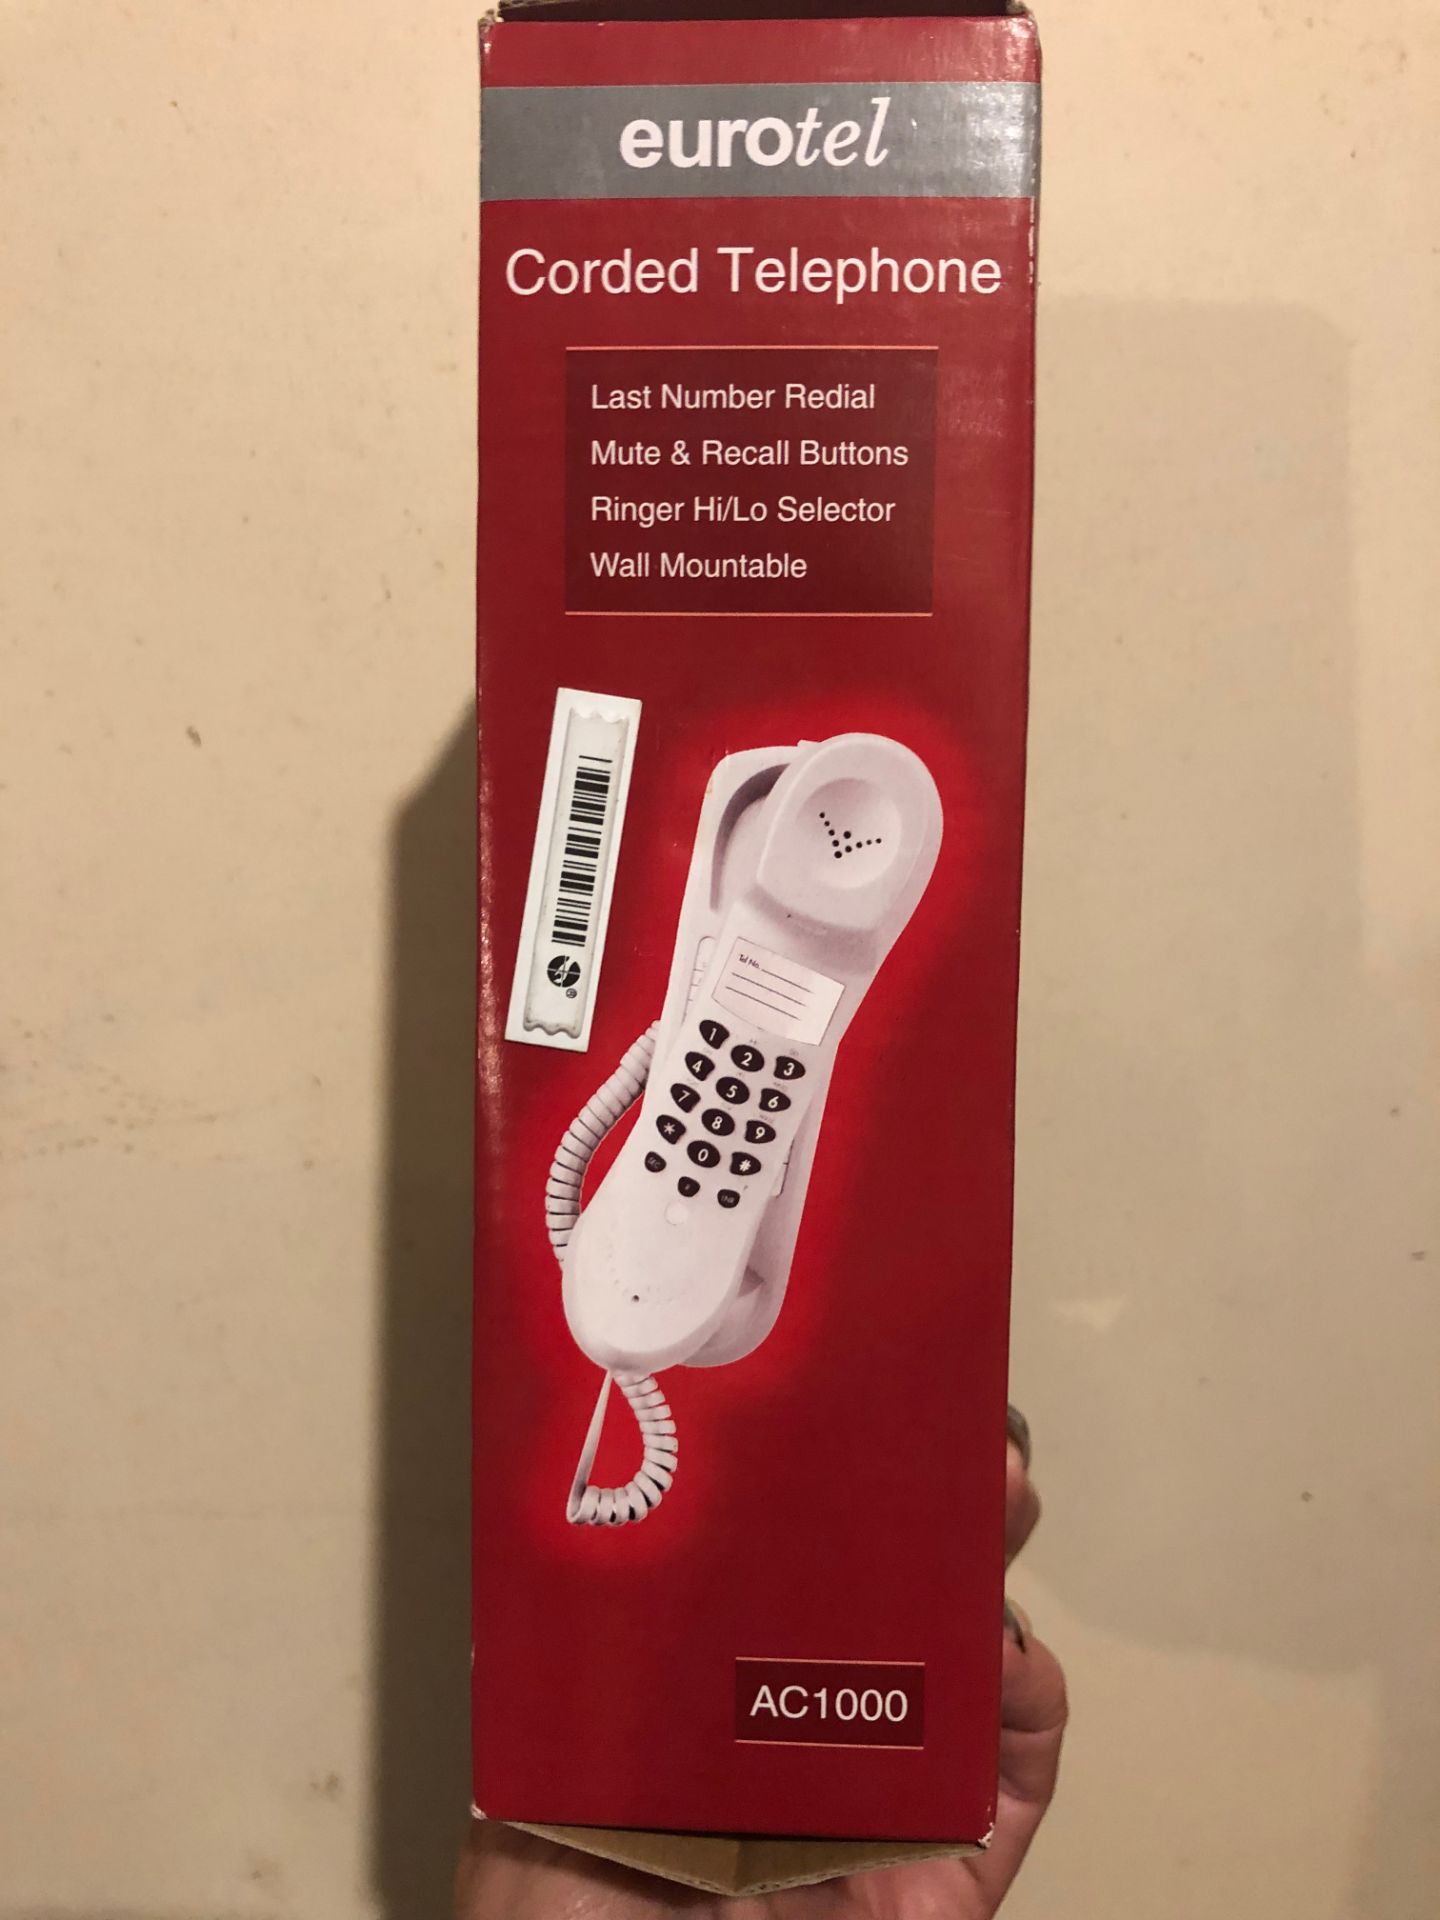 EUROTEL CORDED PHONE NOT USED STILL IN THE BOX BUT BOX DAMAGED - Image 2 of 2